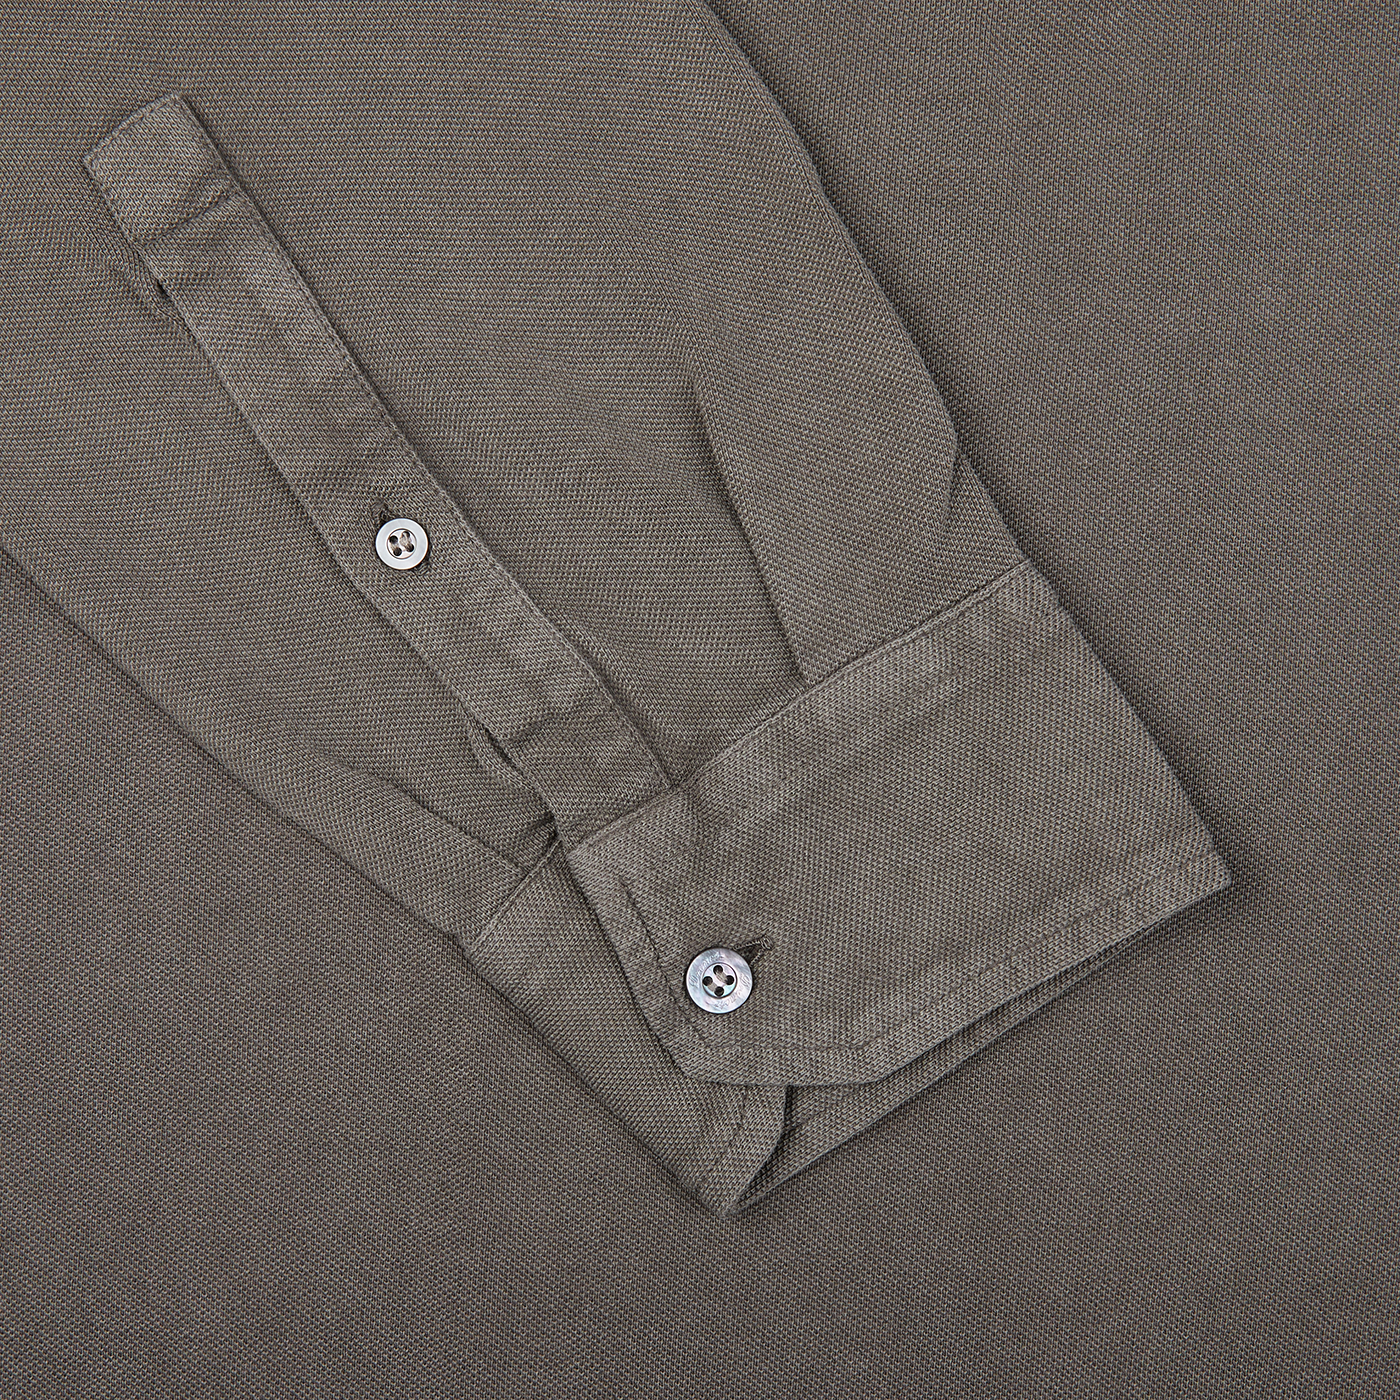 A close up of a brown grey cotton piquet LS polo shirt from Italy by Drumohr, featuring buttons.